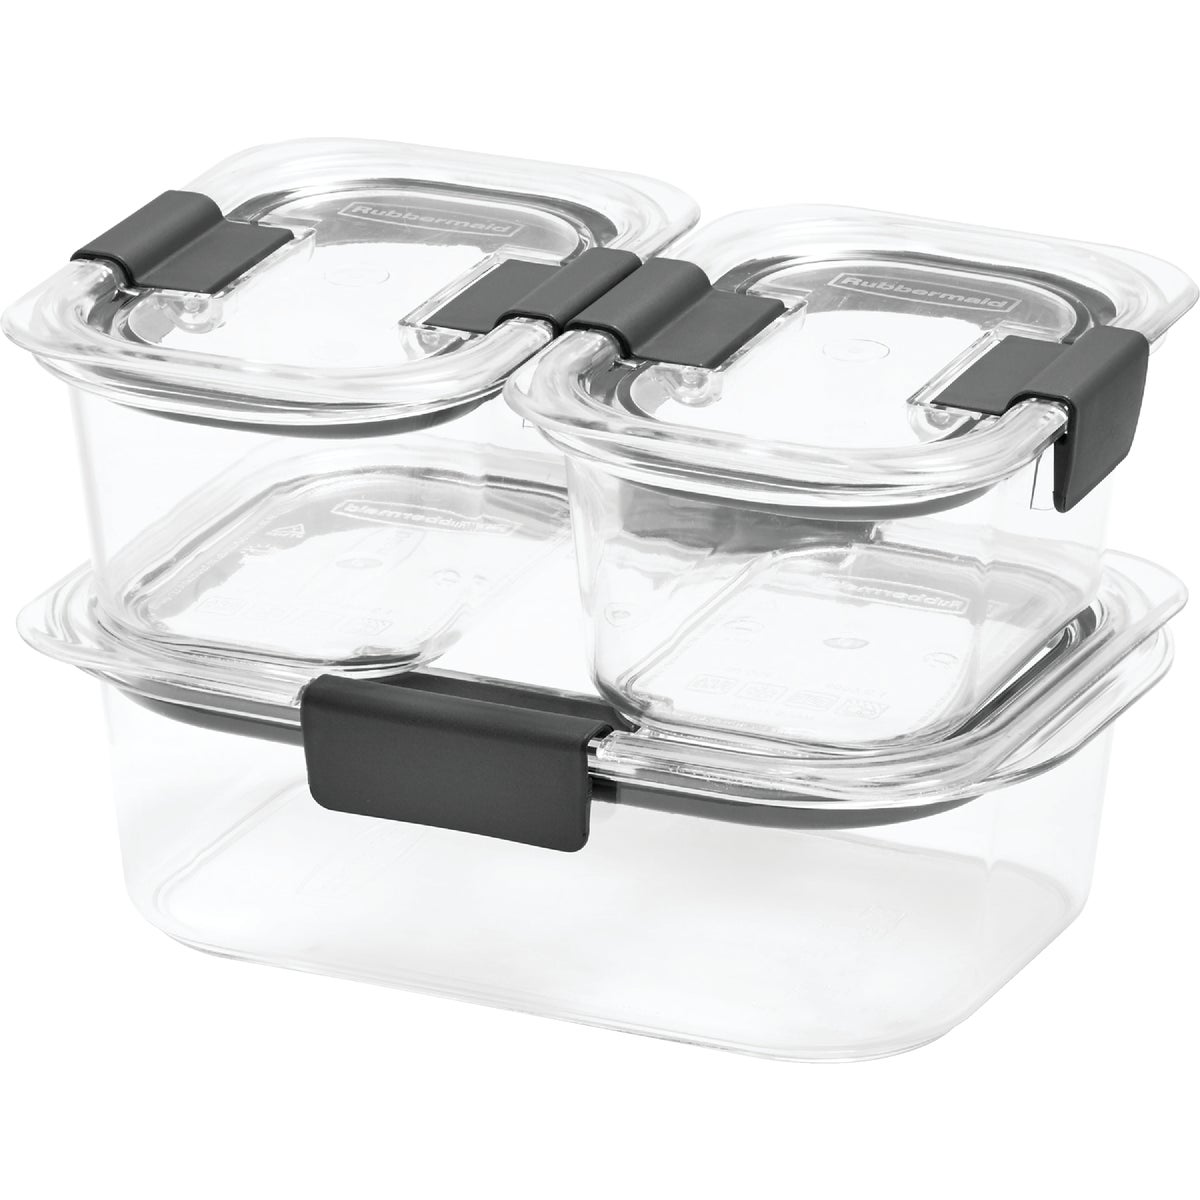 Item 601945, 6-piece Brilliance food storage containers are intelligently crafted and 